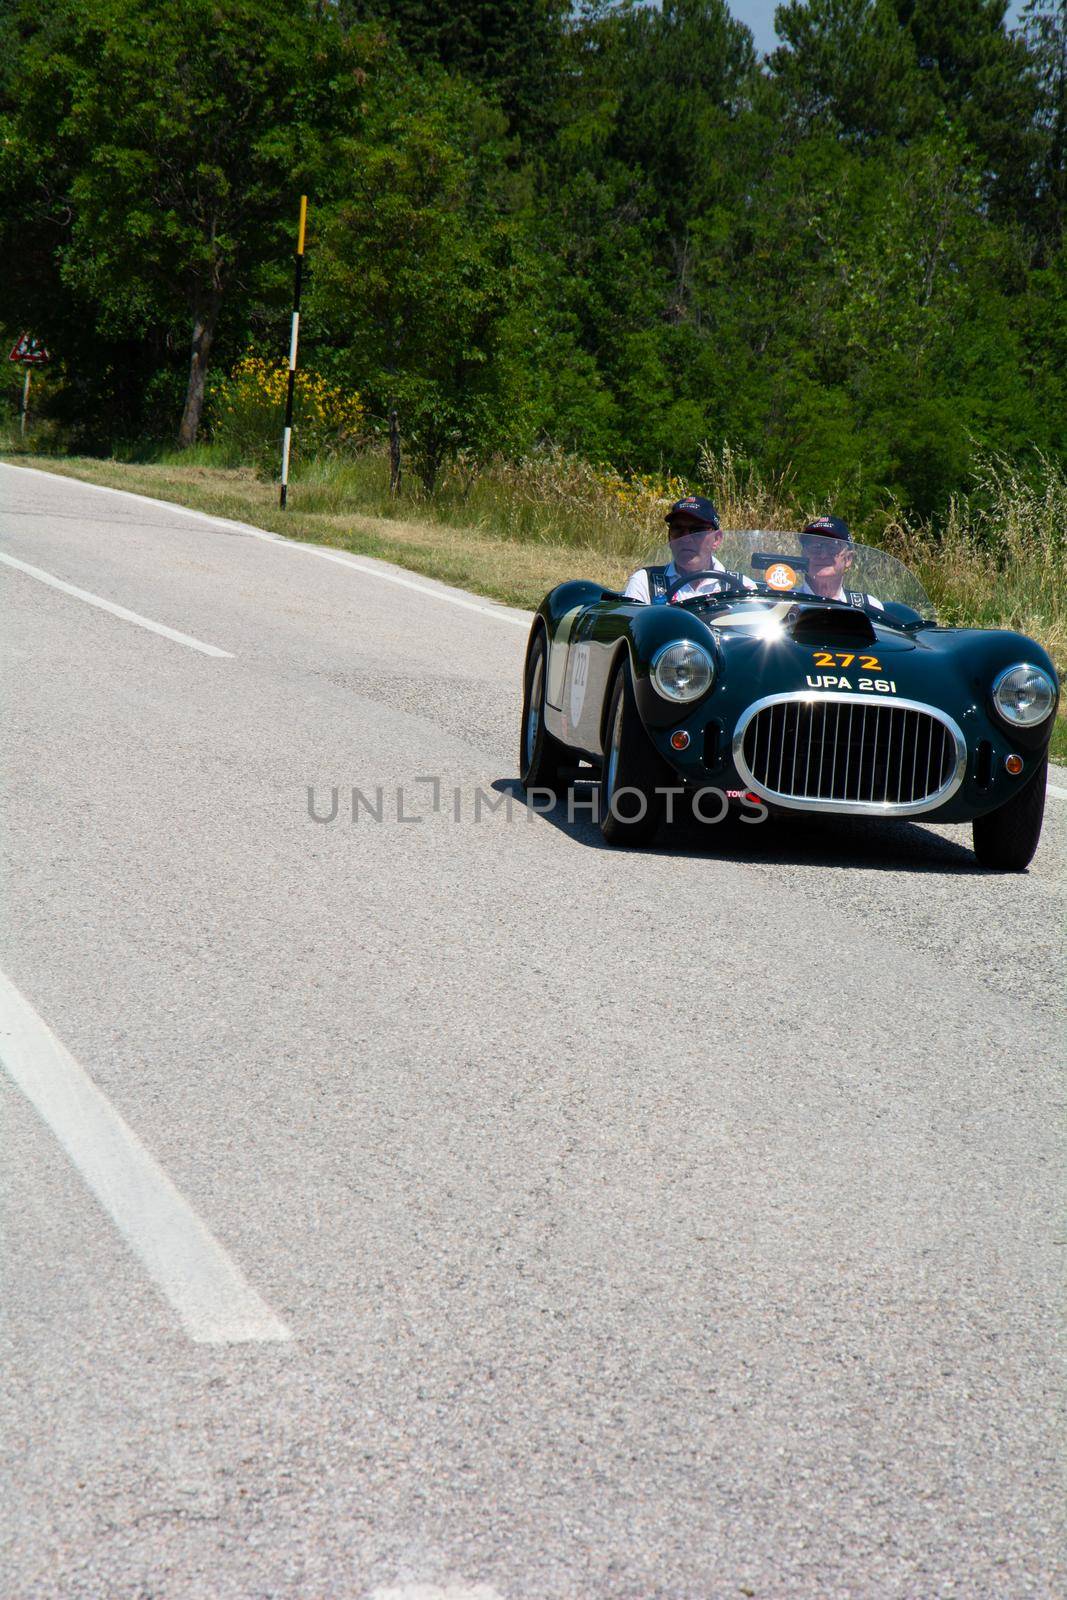 COOPER BRISTOL T25 BRISTOL 1953 on an old racing car in rally Mille Miglia 2022 the famous italian historical race (1927-1957 by massimocampanari